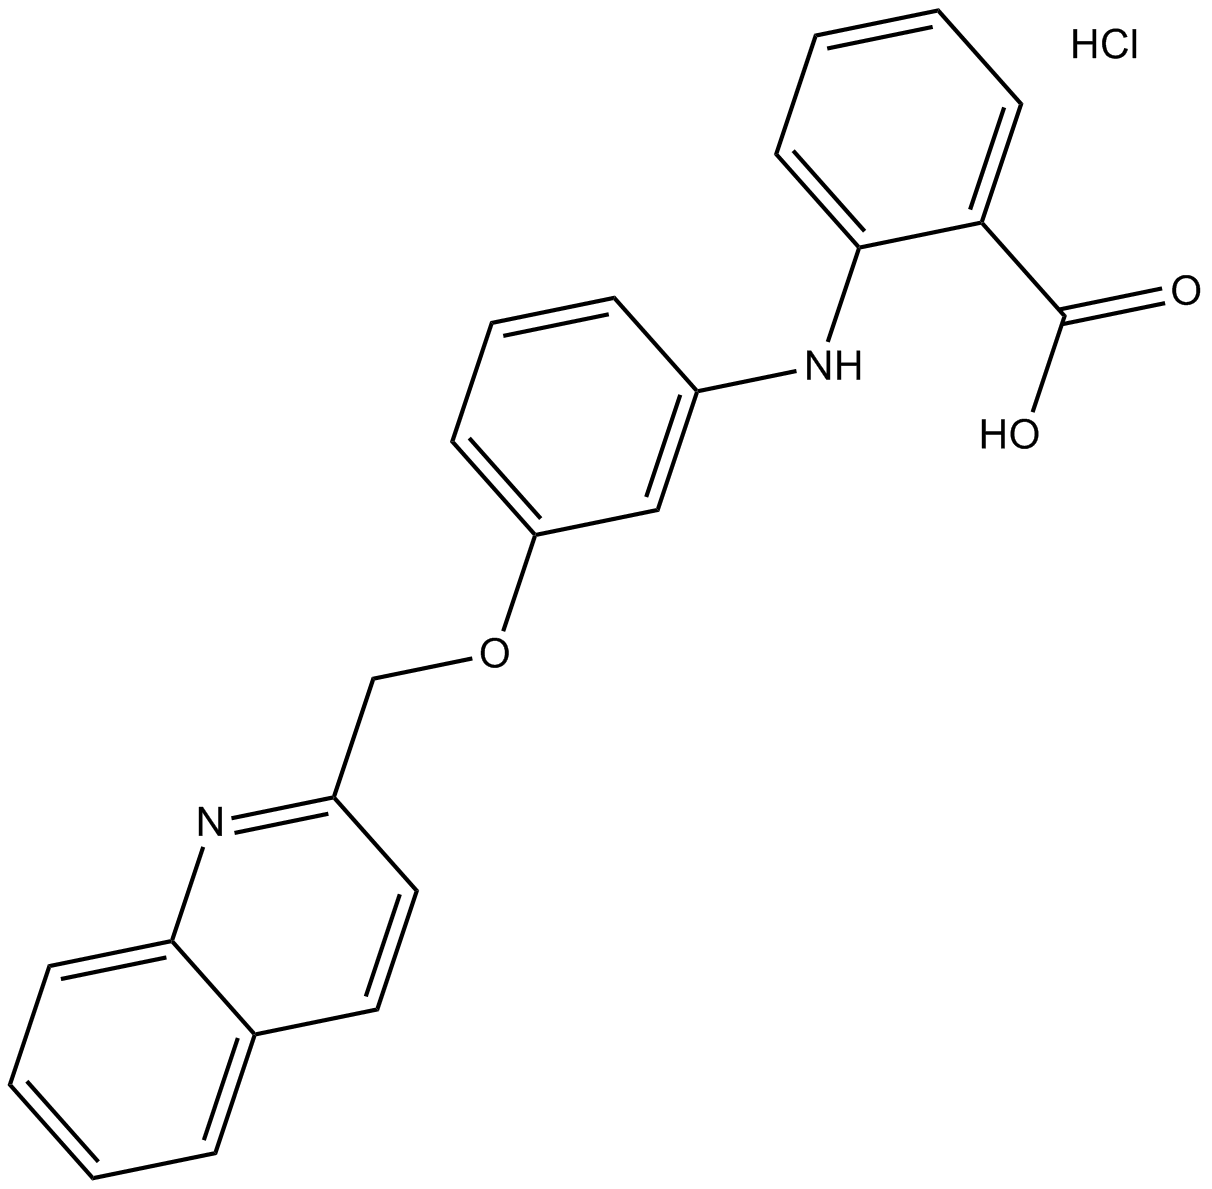 SR 2640 hydrochloride  Chemical Structure